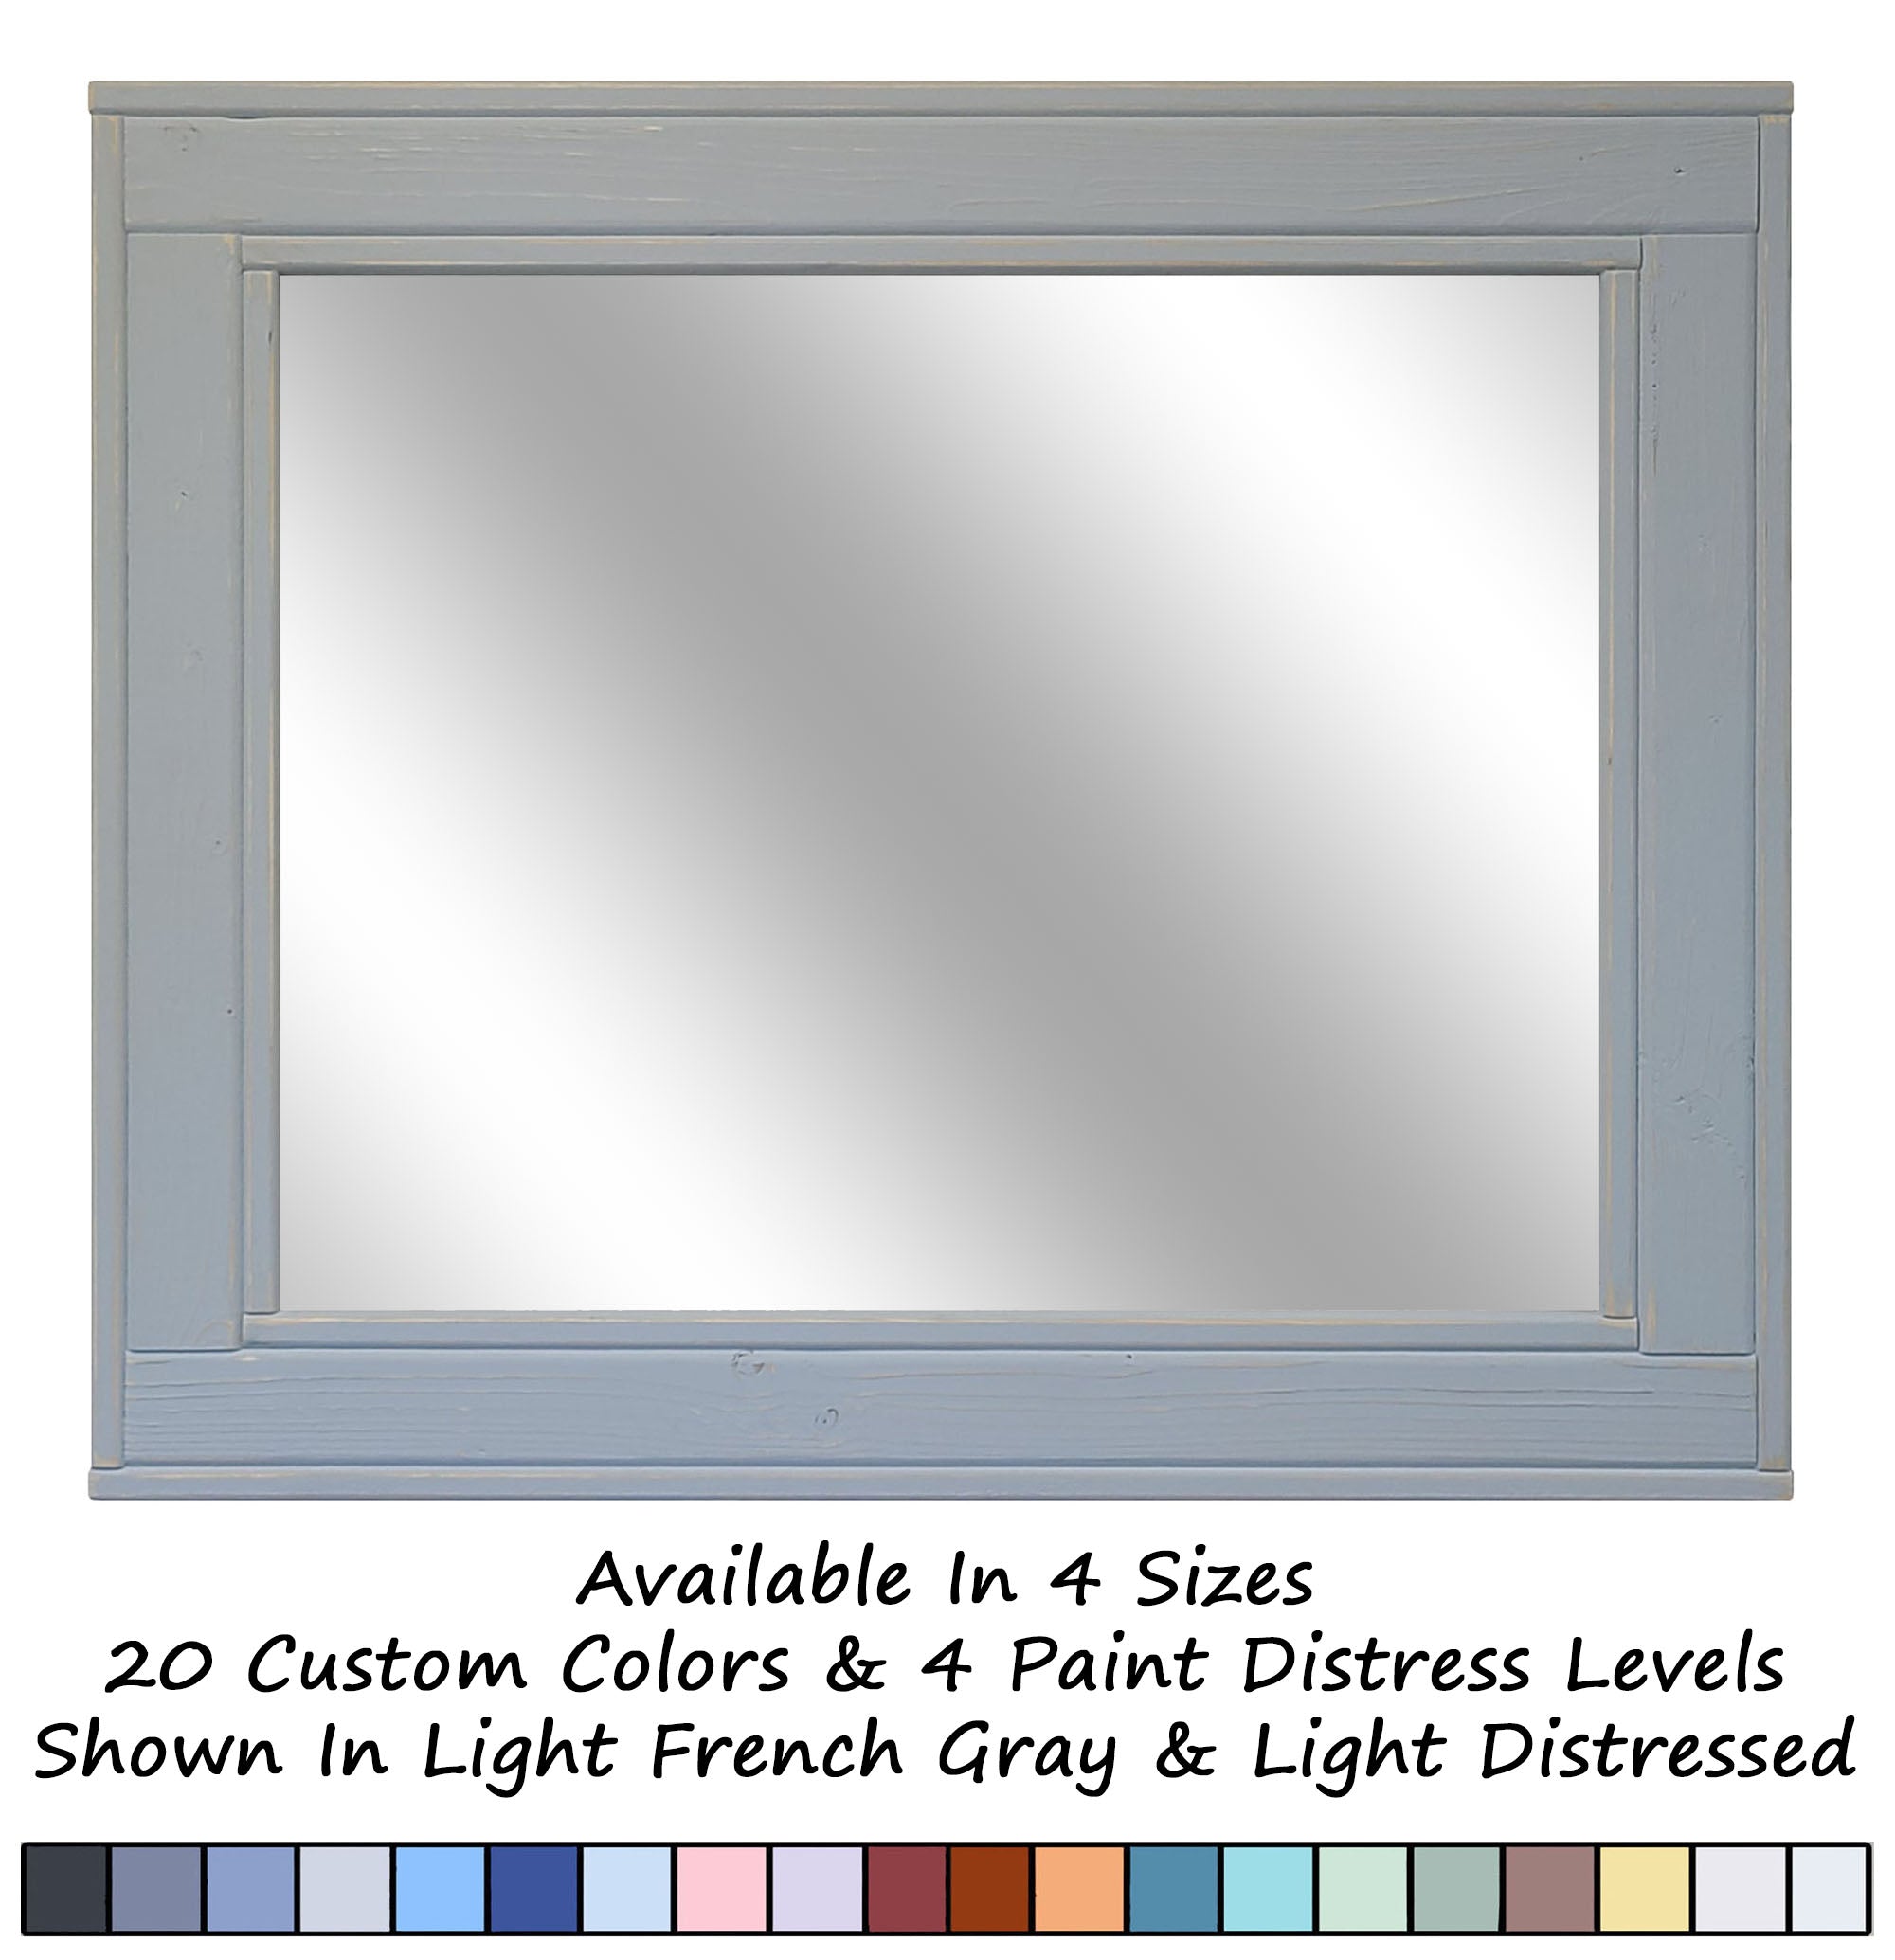 Herringbone Rustic Reclaimed Wood Wall Mirror, 5 Sizes & 20 Colors, Shown in Light French Gray